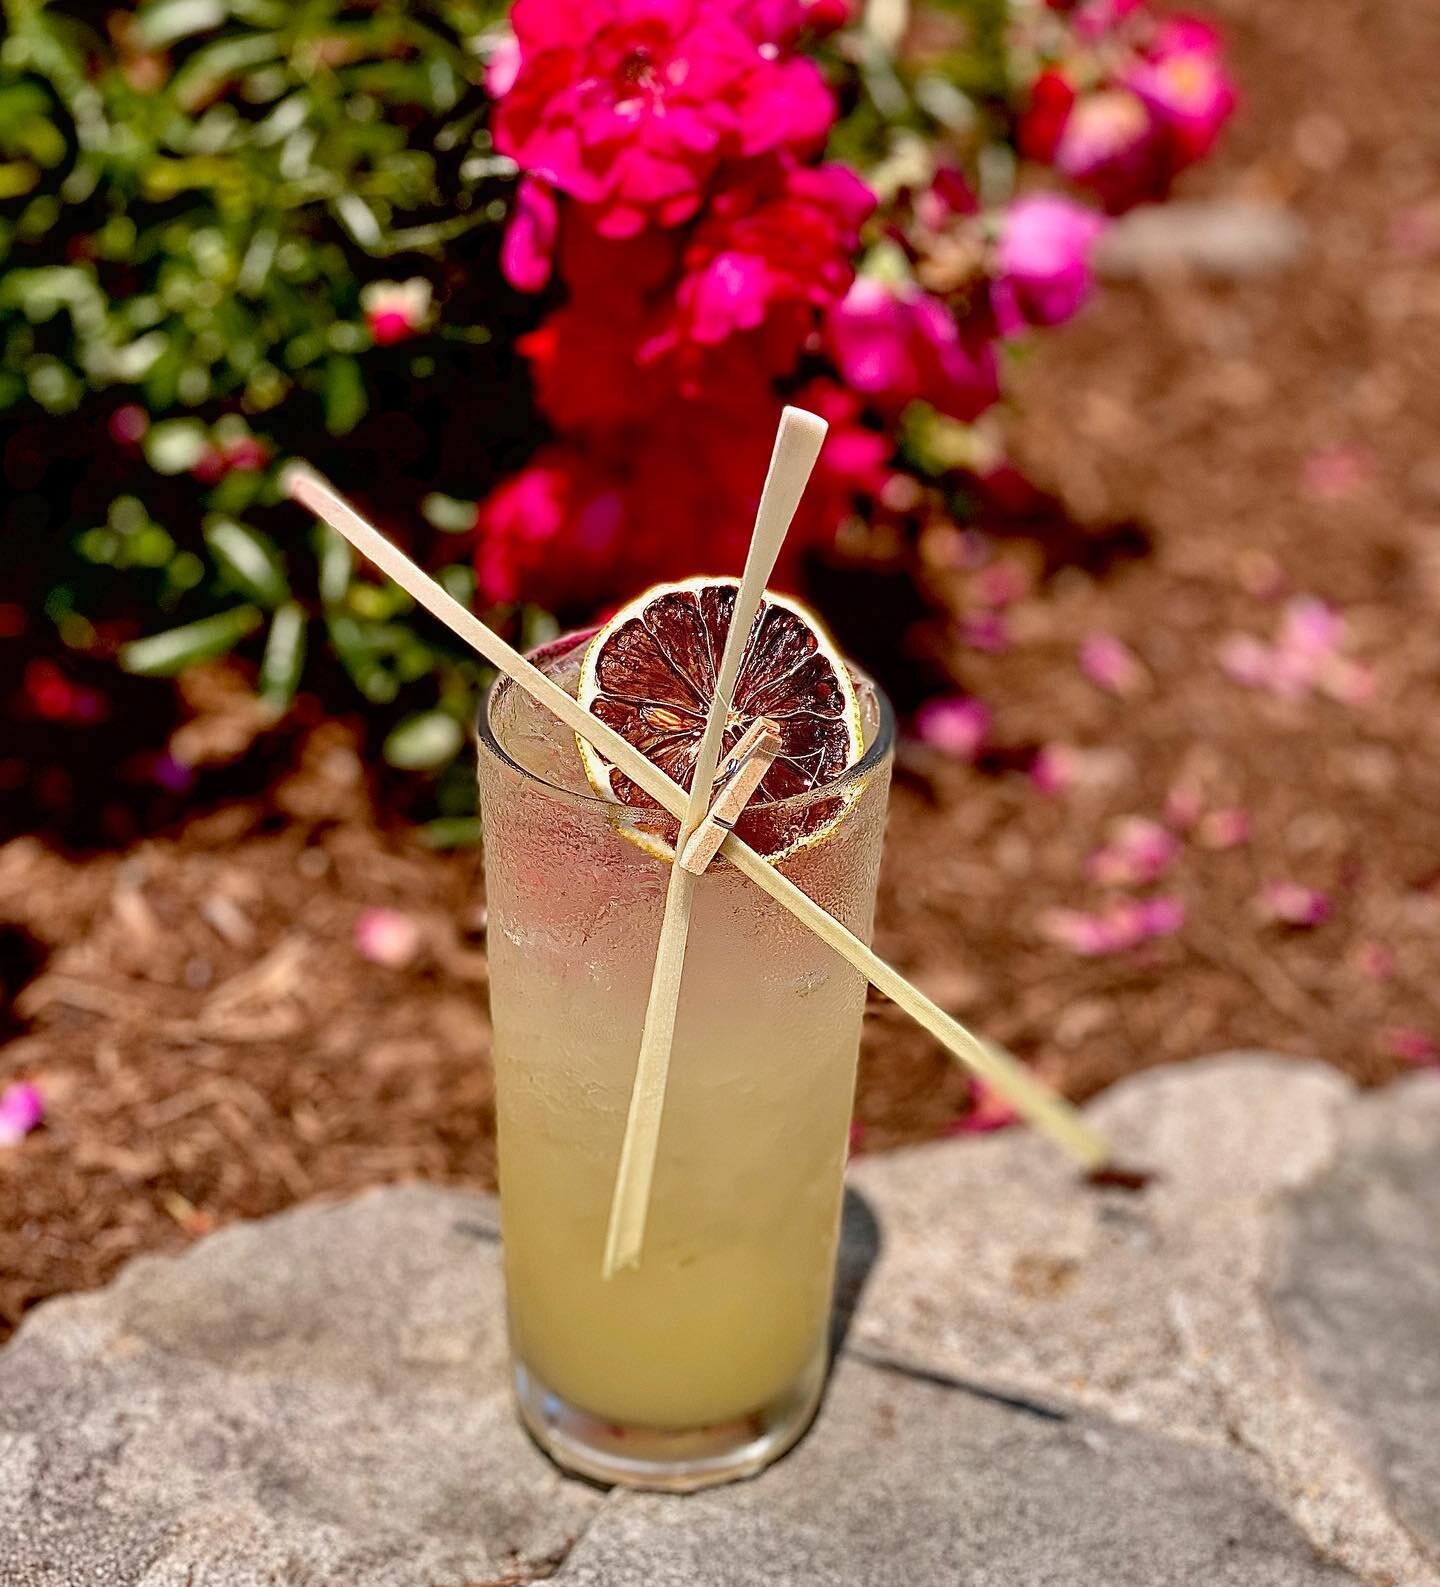 Beat the heat with our new summer cocktail, the Lemongrass Highball. 
Vodka | Lemongrass | Citrus Oleo 
Topped with sparkling wine. 🌾🍊
#stoneacre #newportri #theclassiccoast